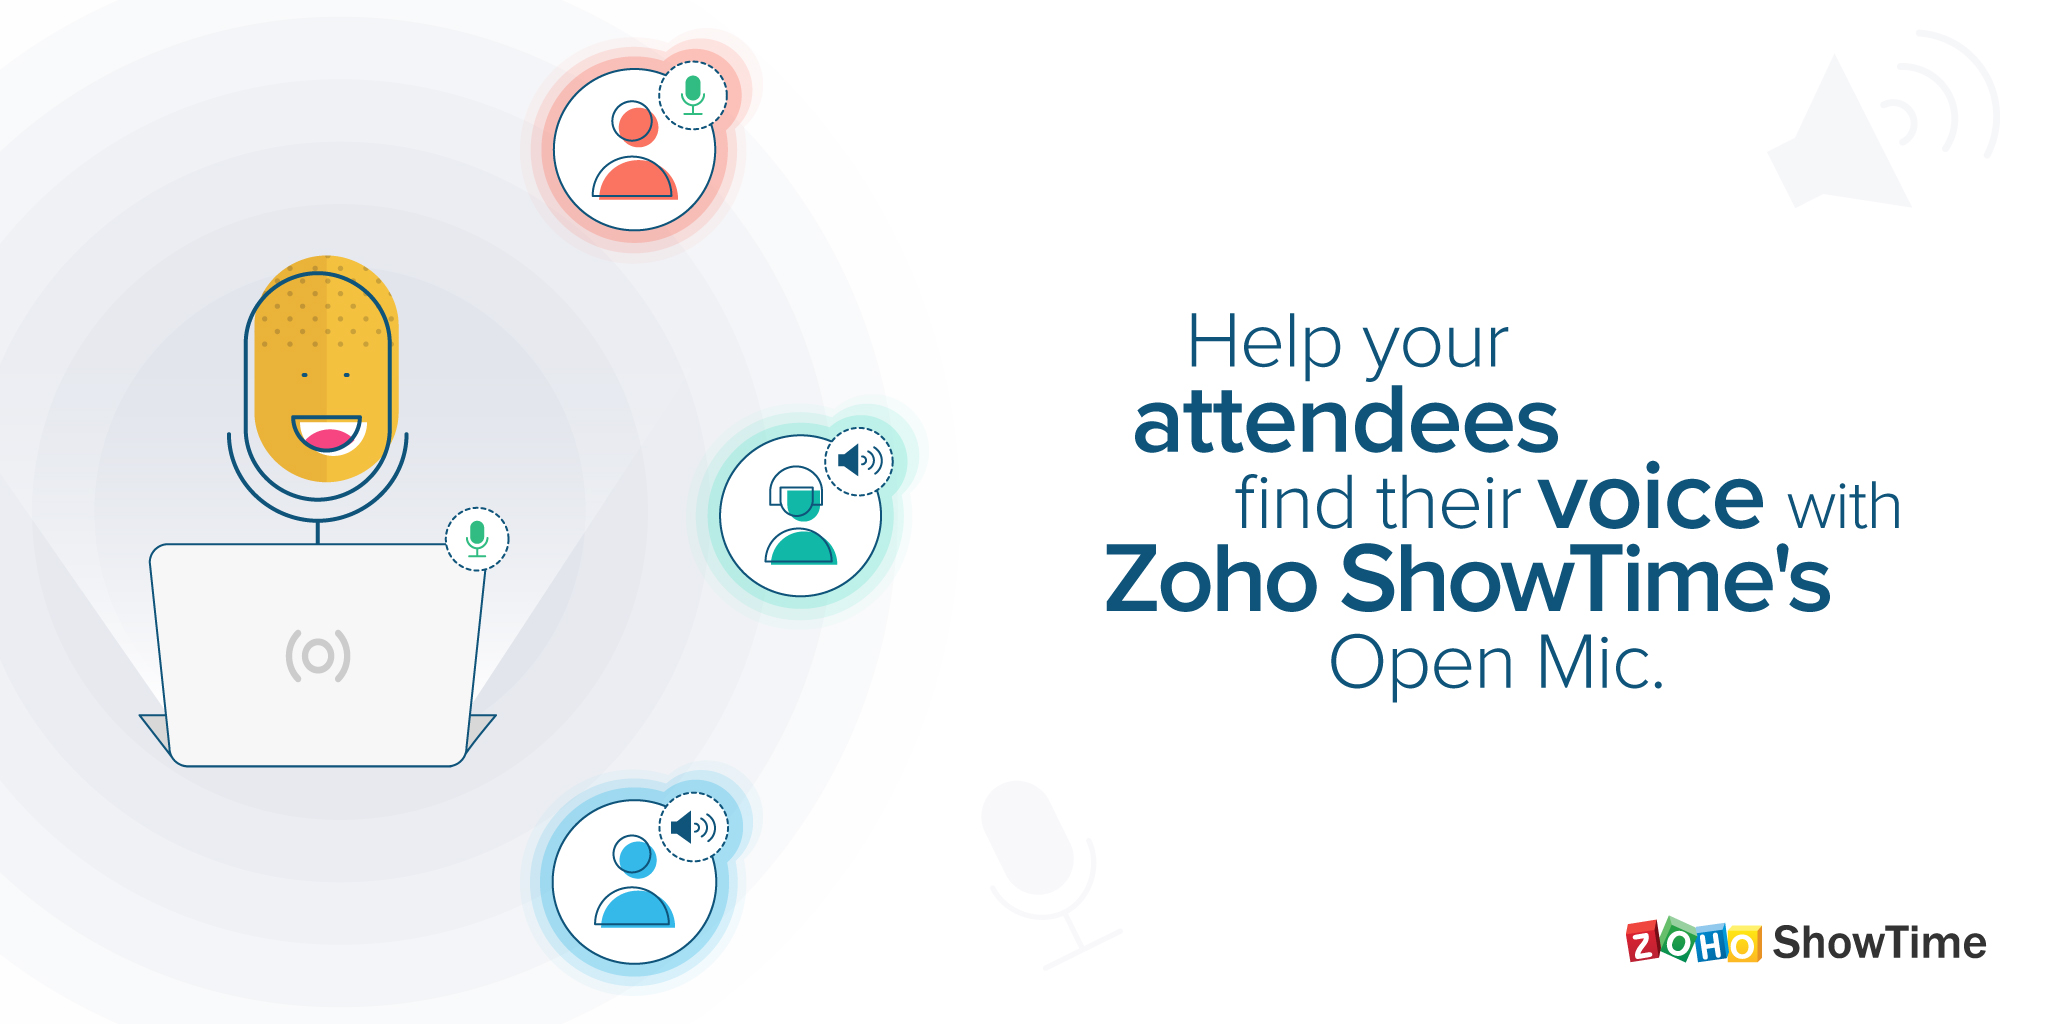 Introducing Zoho ShowTime's Open Mic: Let your learners have their say!